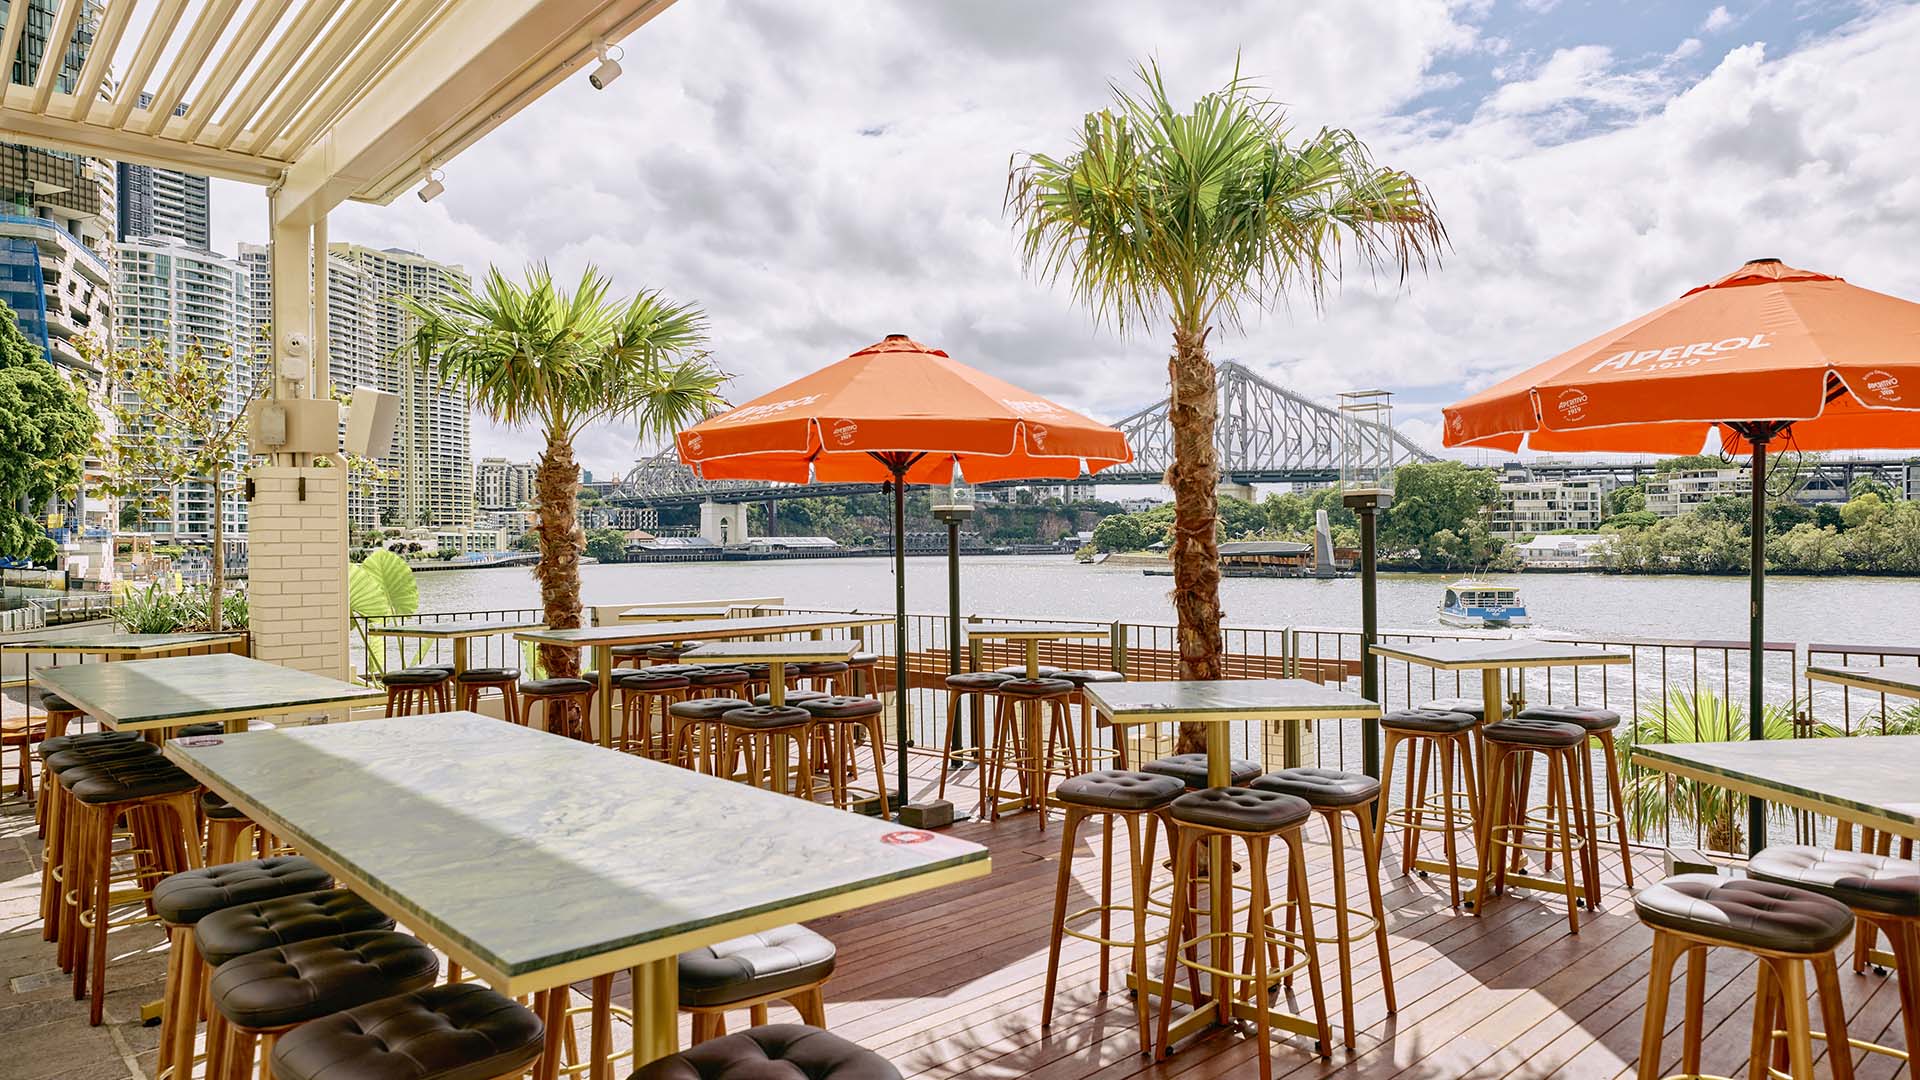 The Best Waterfront Venues in and Around Brisbane That Serve Drinks with a View All Year Round